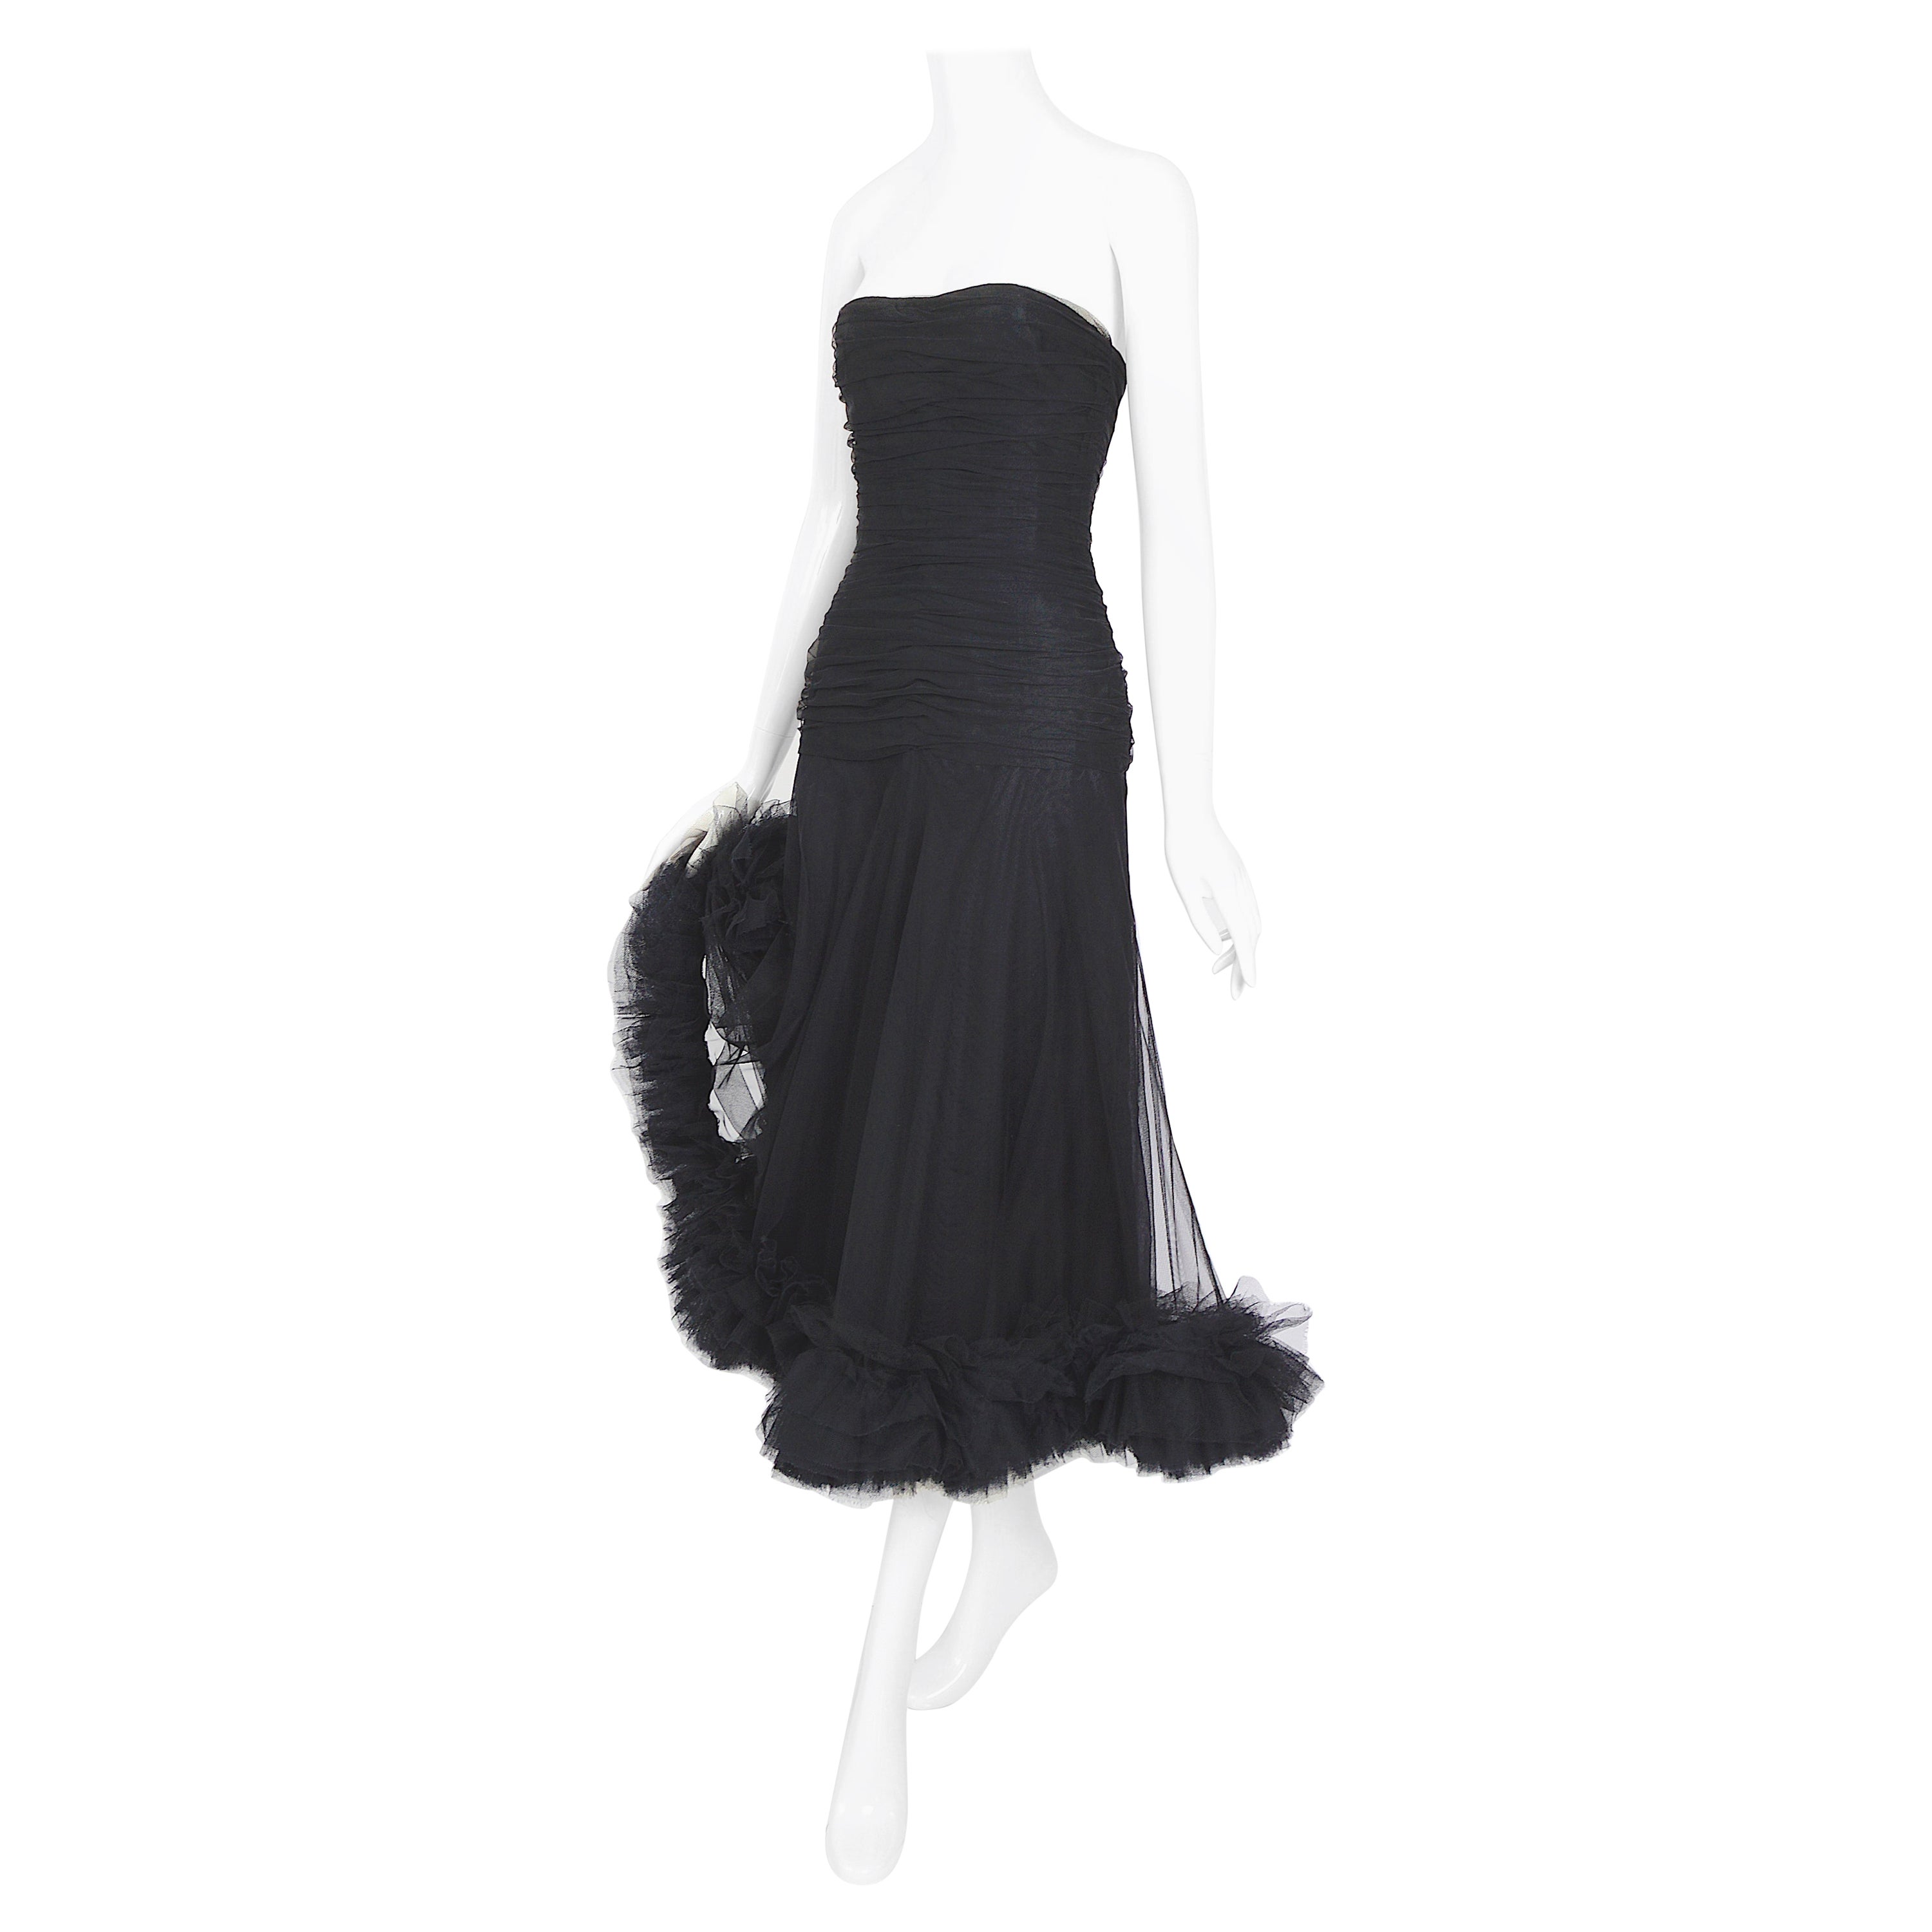 Christian Dior by Marc Bohan vintage numbered couture black tulle evening dress For Sale